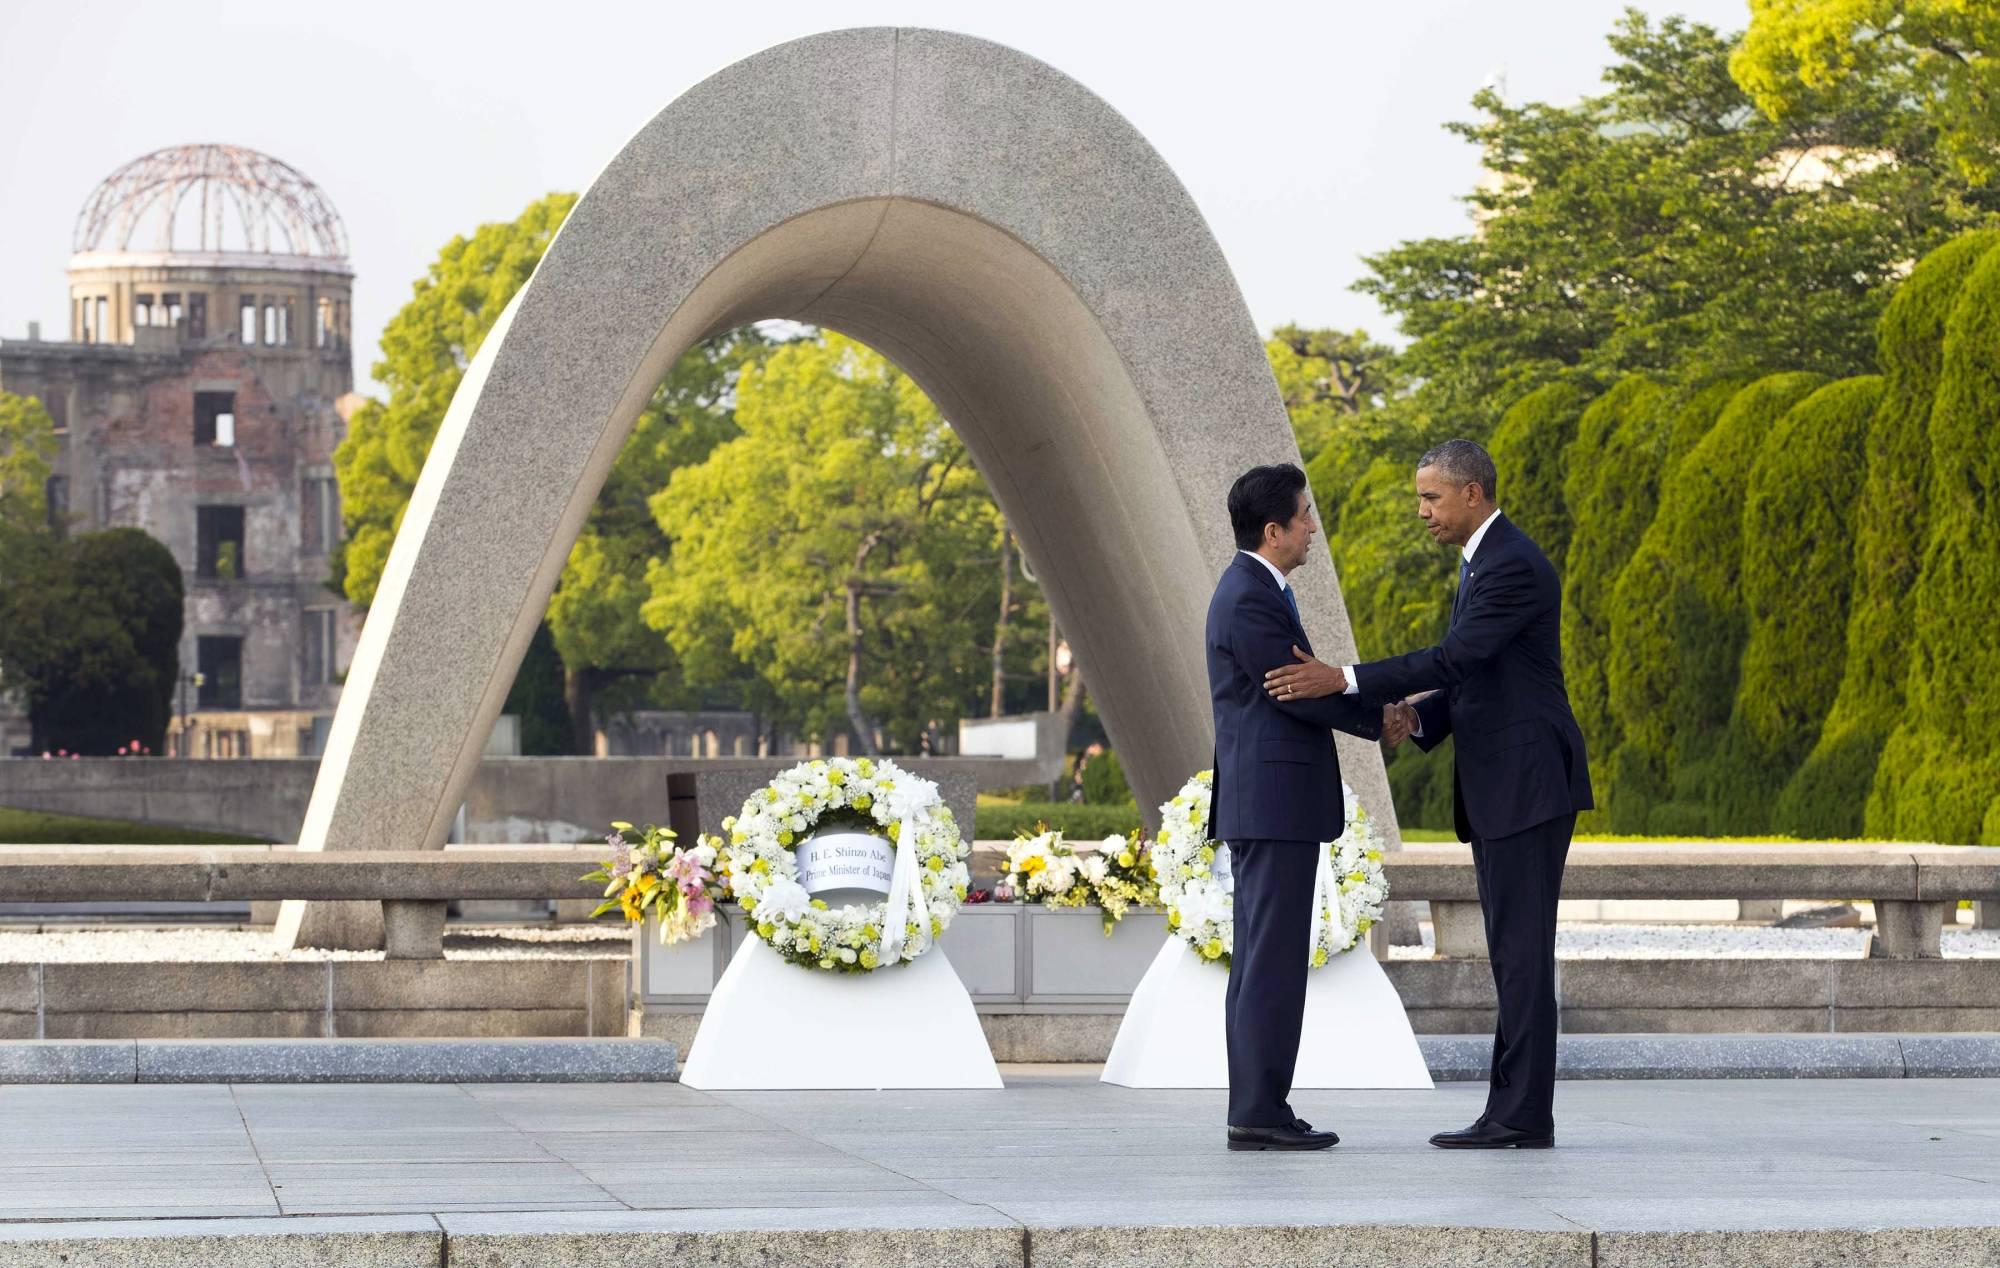 Remembrance of Hiroshima: Honoring the Past and Shaping the Future